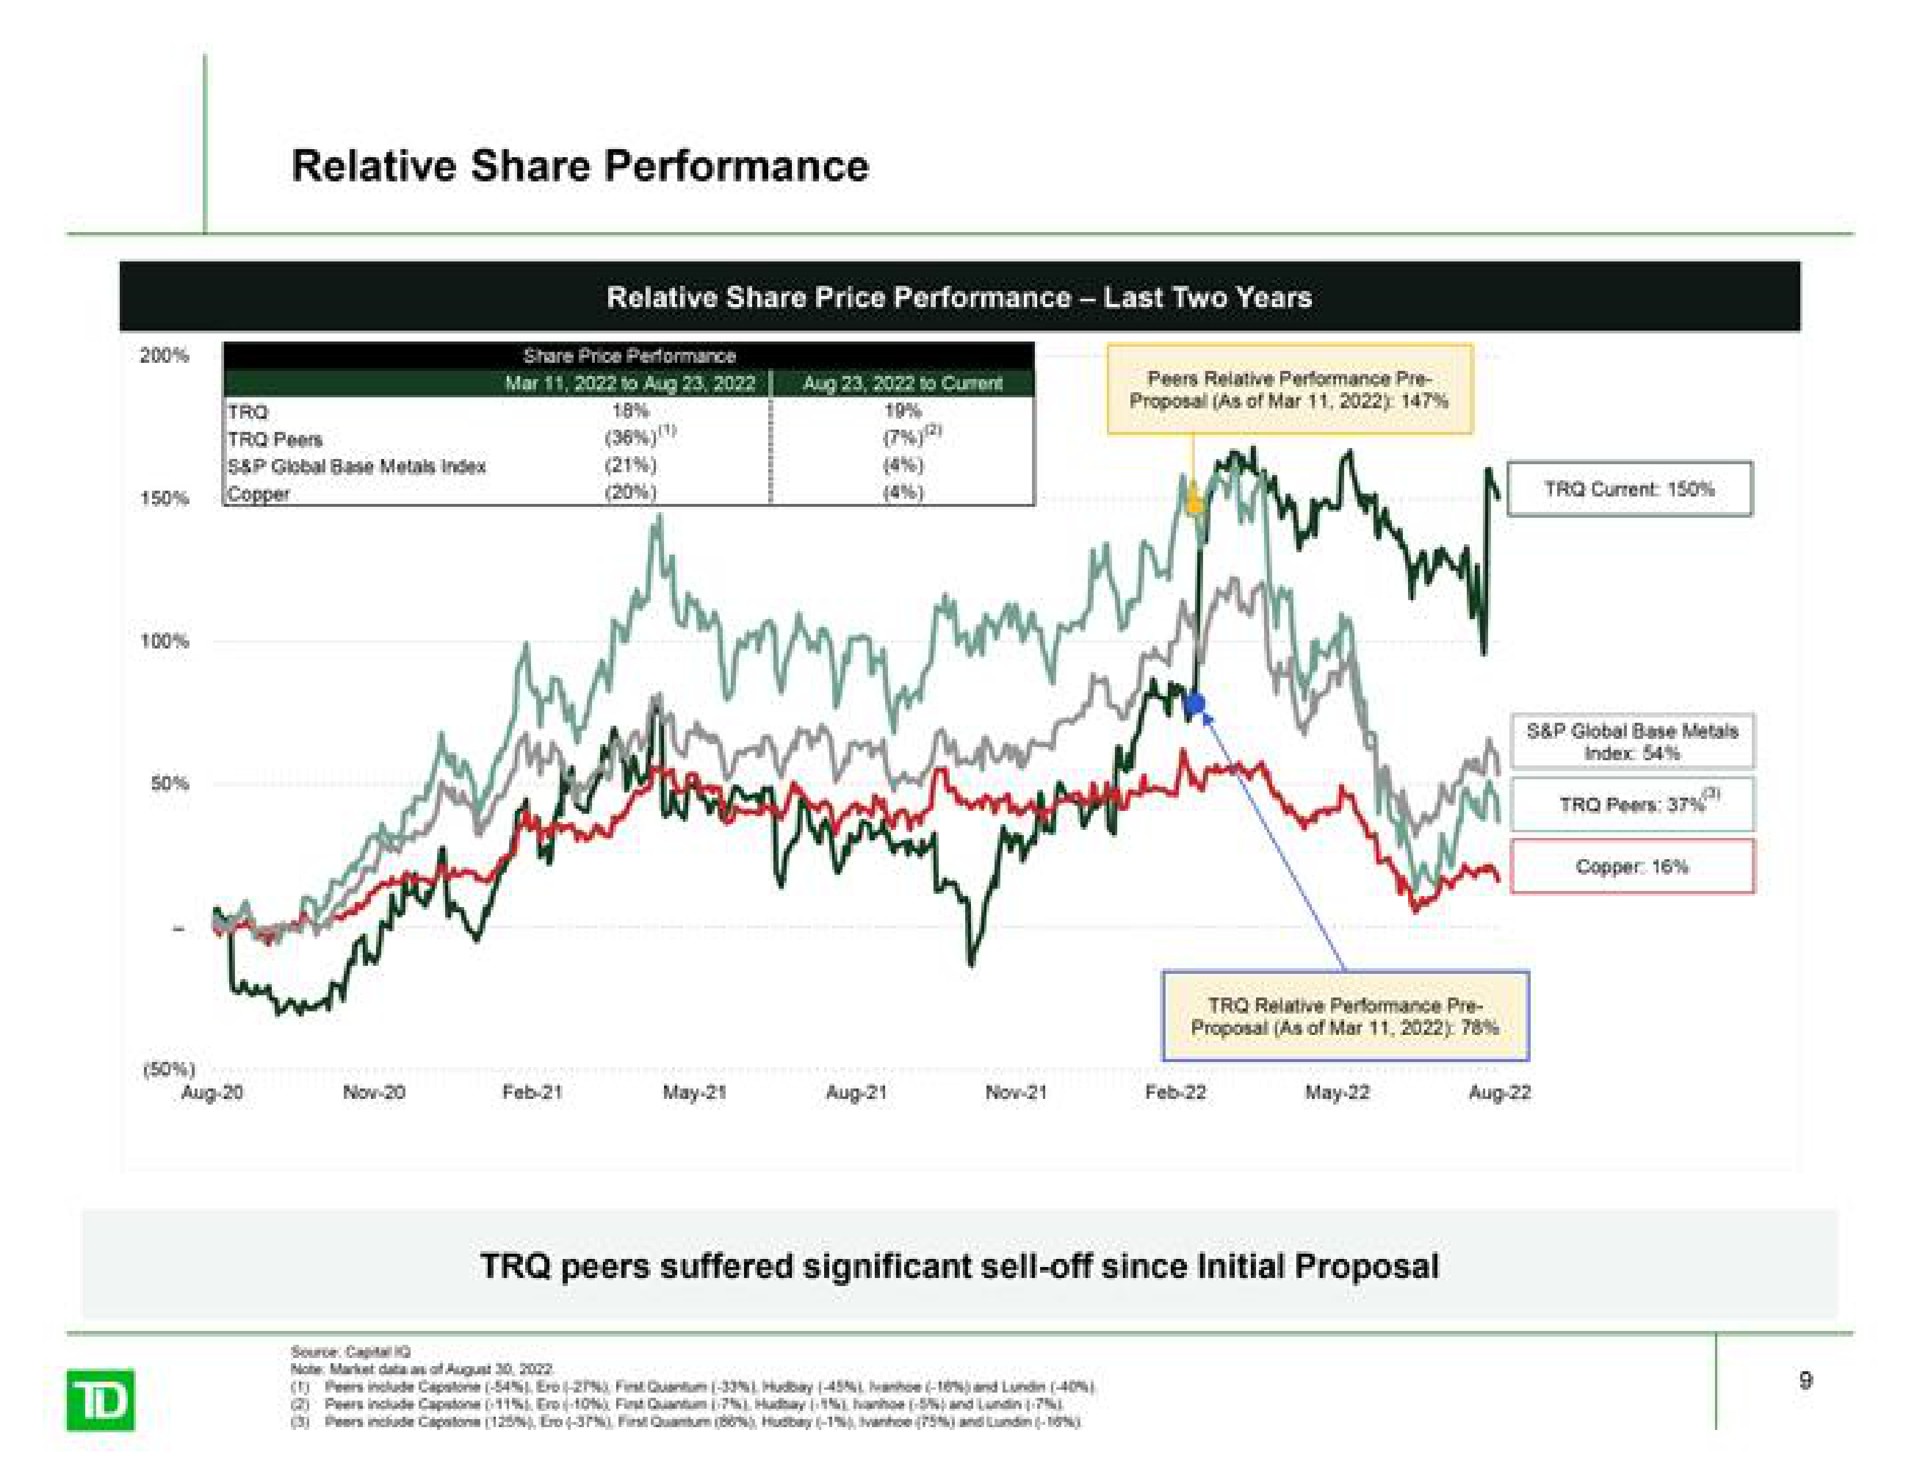 relative share performance | TD Securities